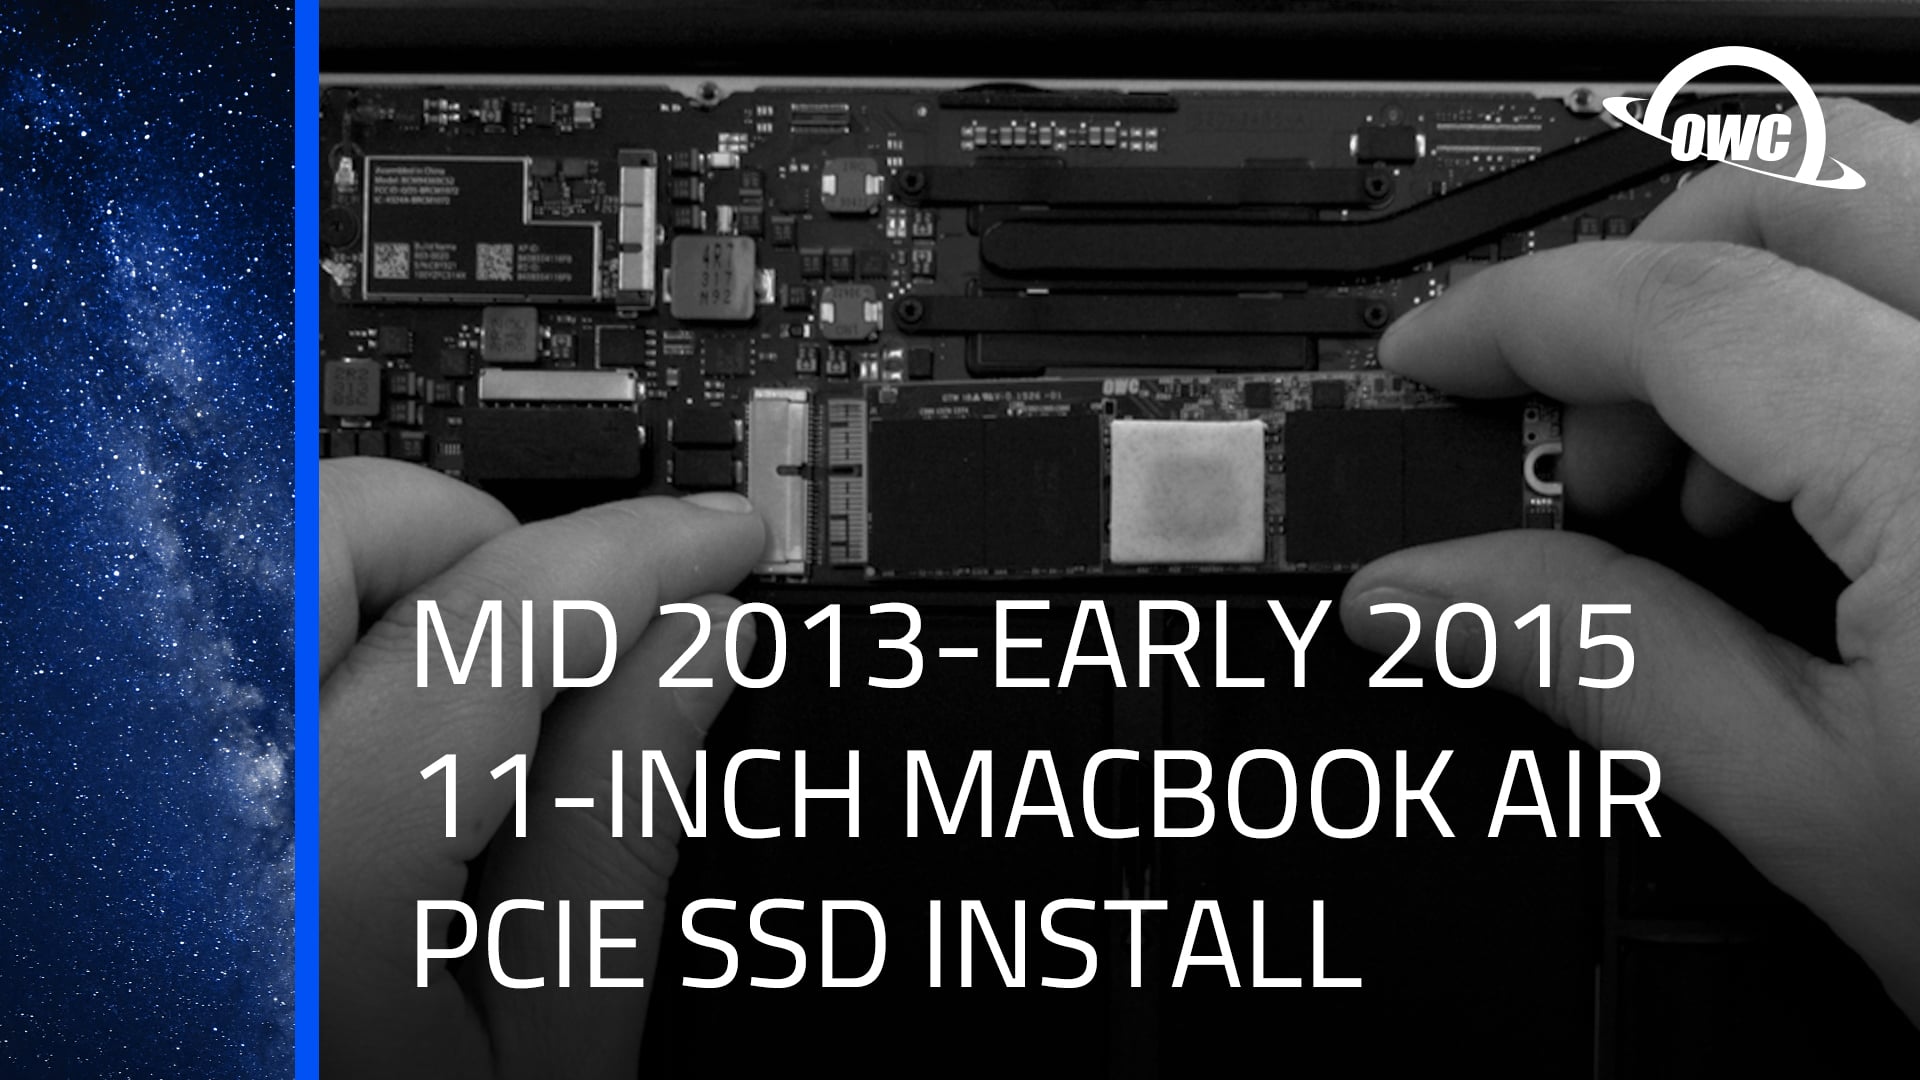 Array Opaque opretholde How to Upgrade the PCIe SSD in an 11-inch MacBook Air (Mid 2013 – Early  2015) on Vimeo